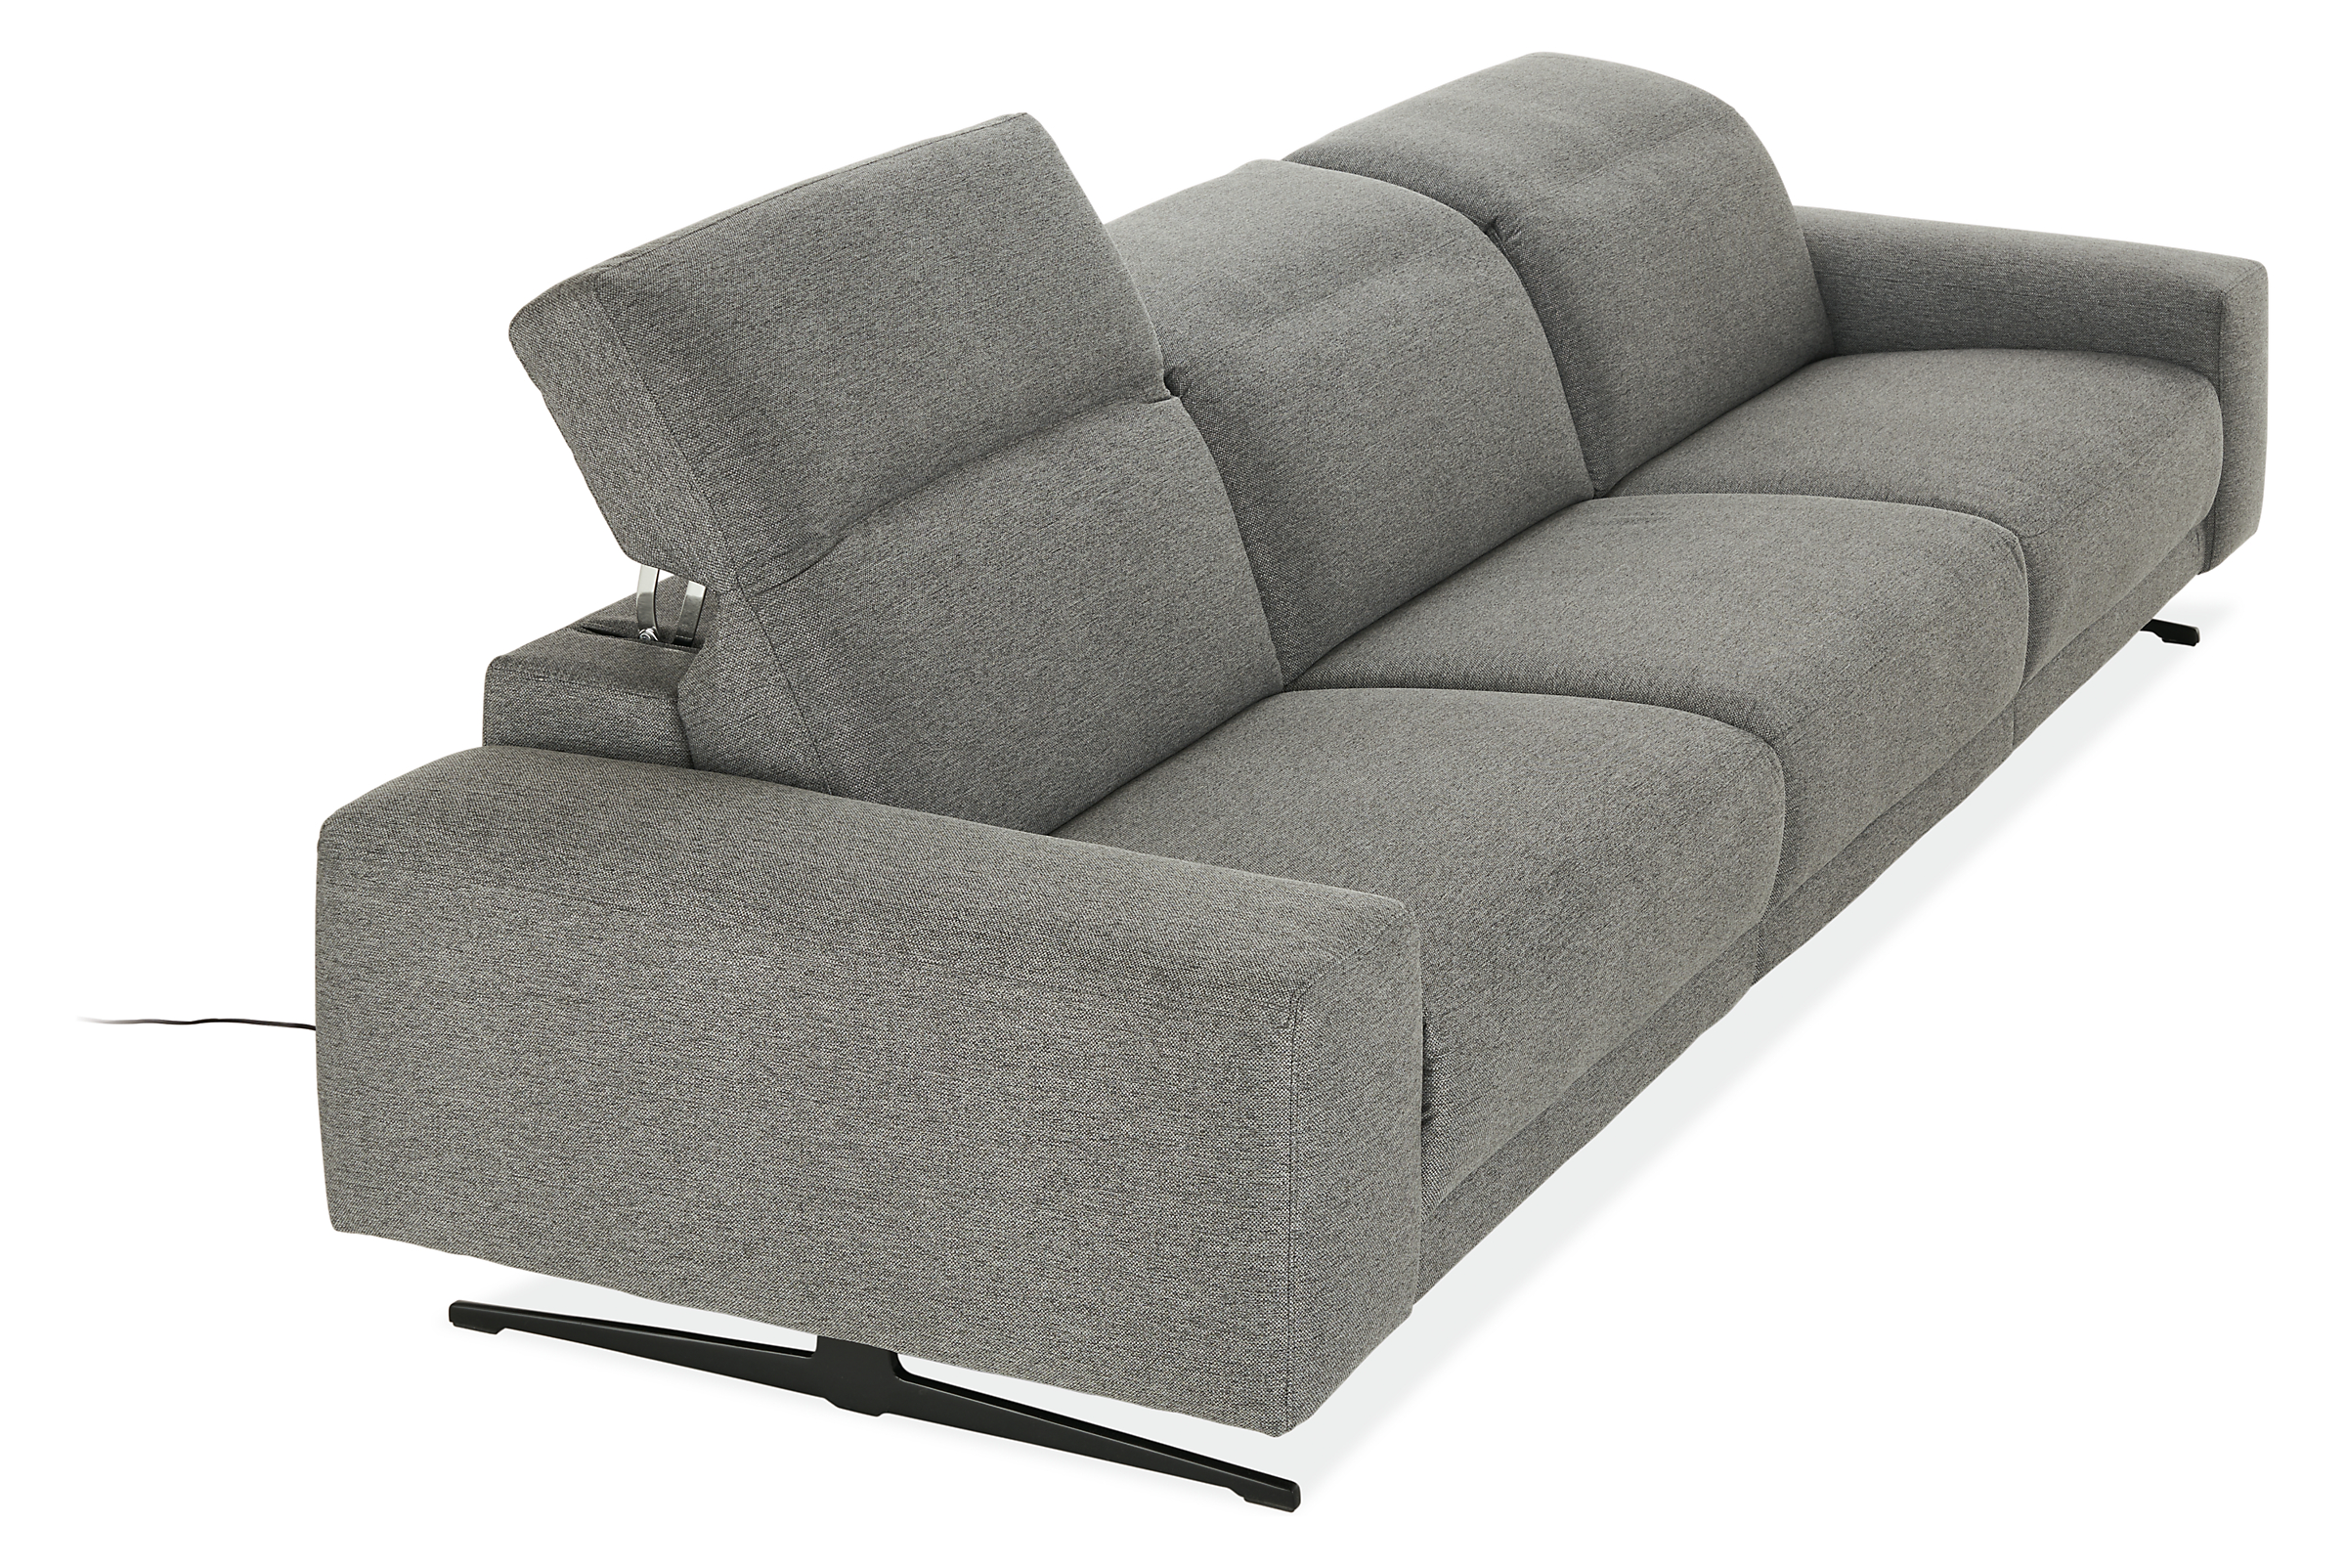 Detail of Gio 3 piece sofa with power in fabric showing headrest in raised position.